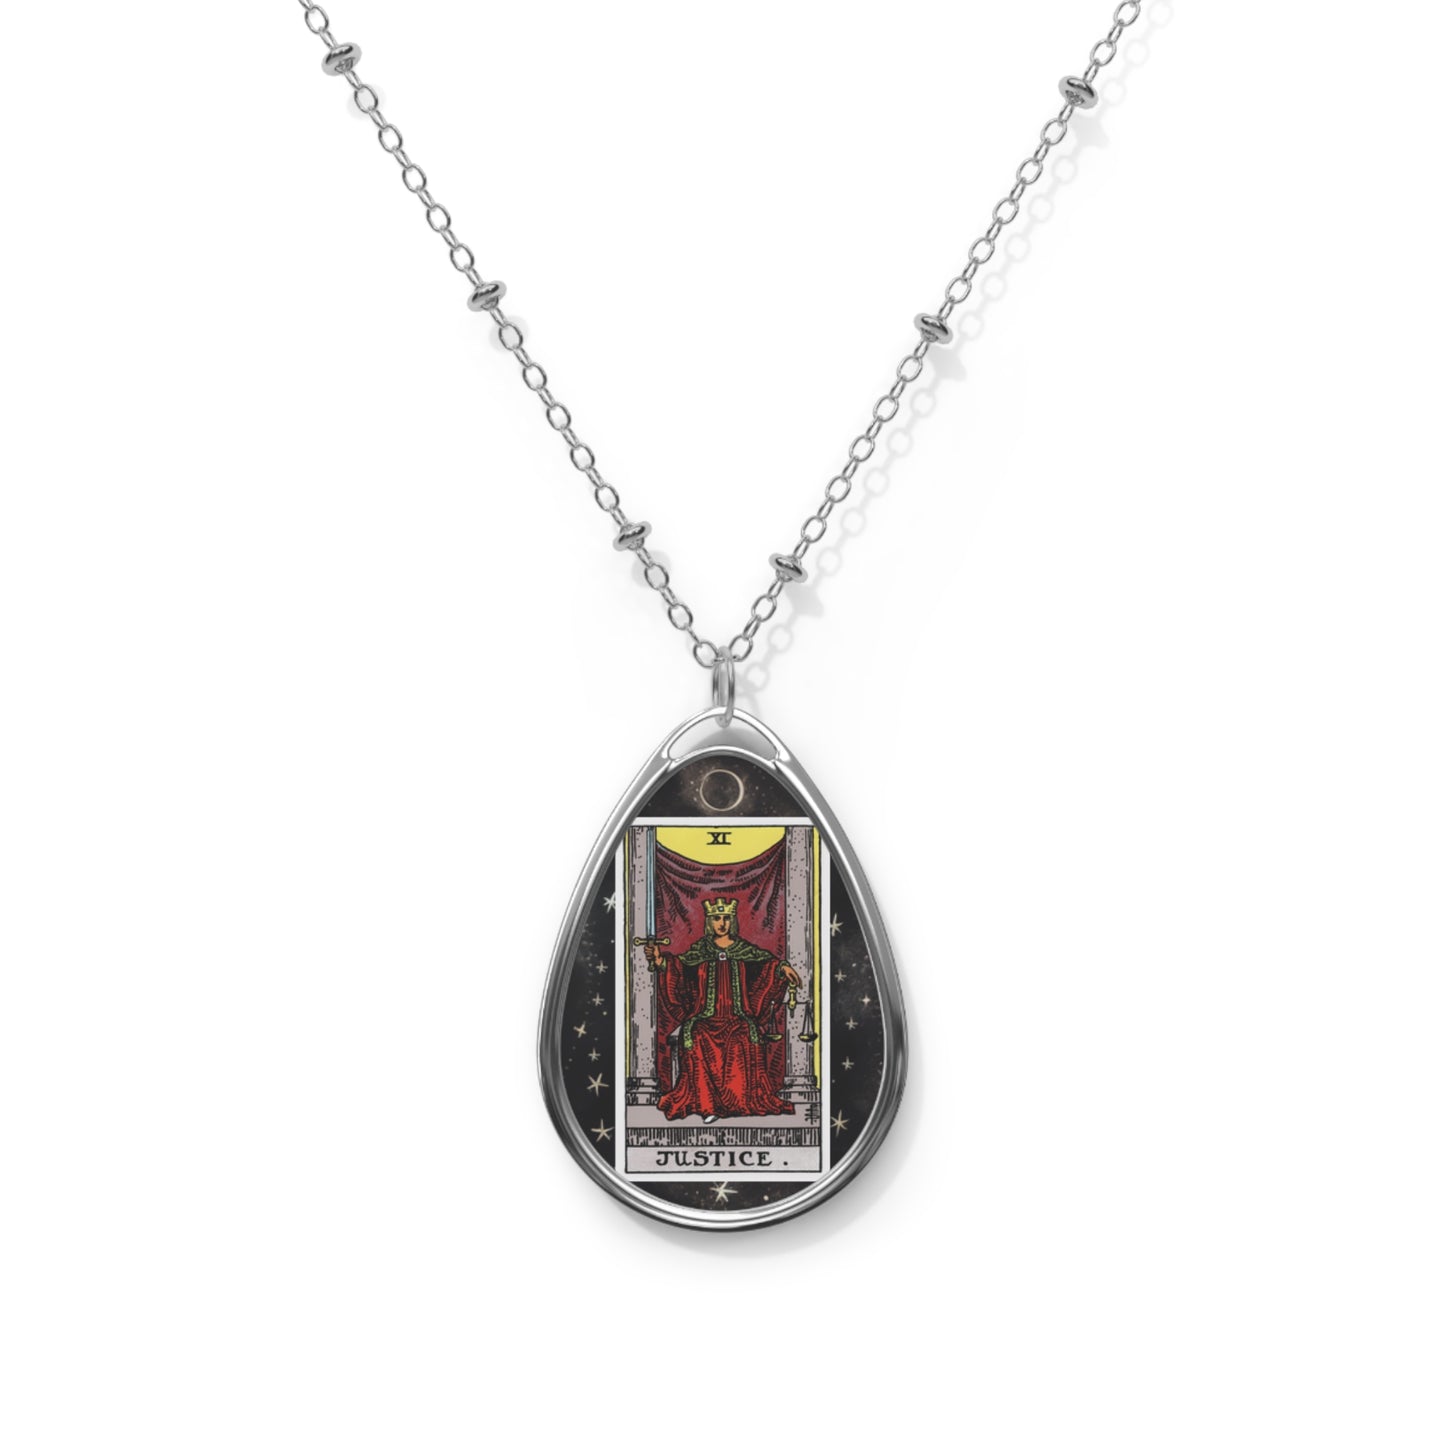 Justice Tarot Card Oval Pendant Necklace With Chain